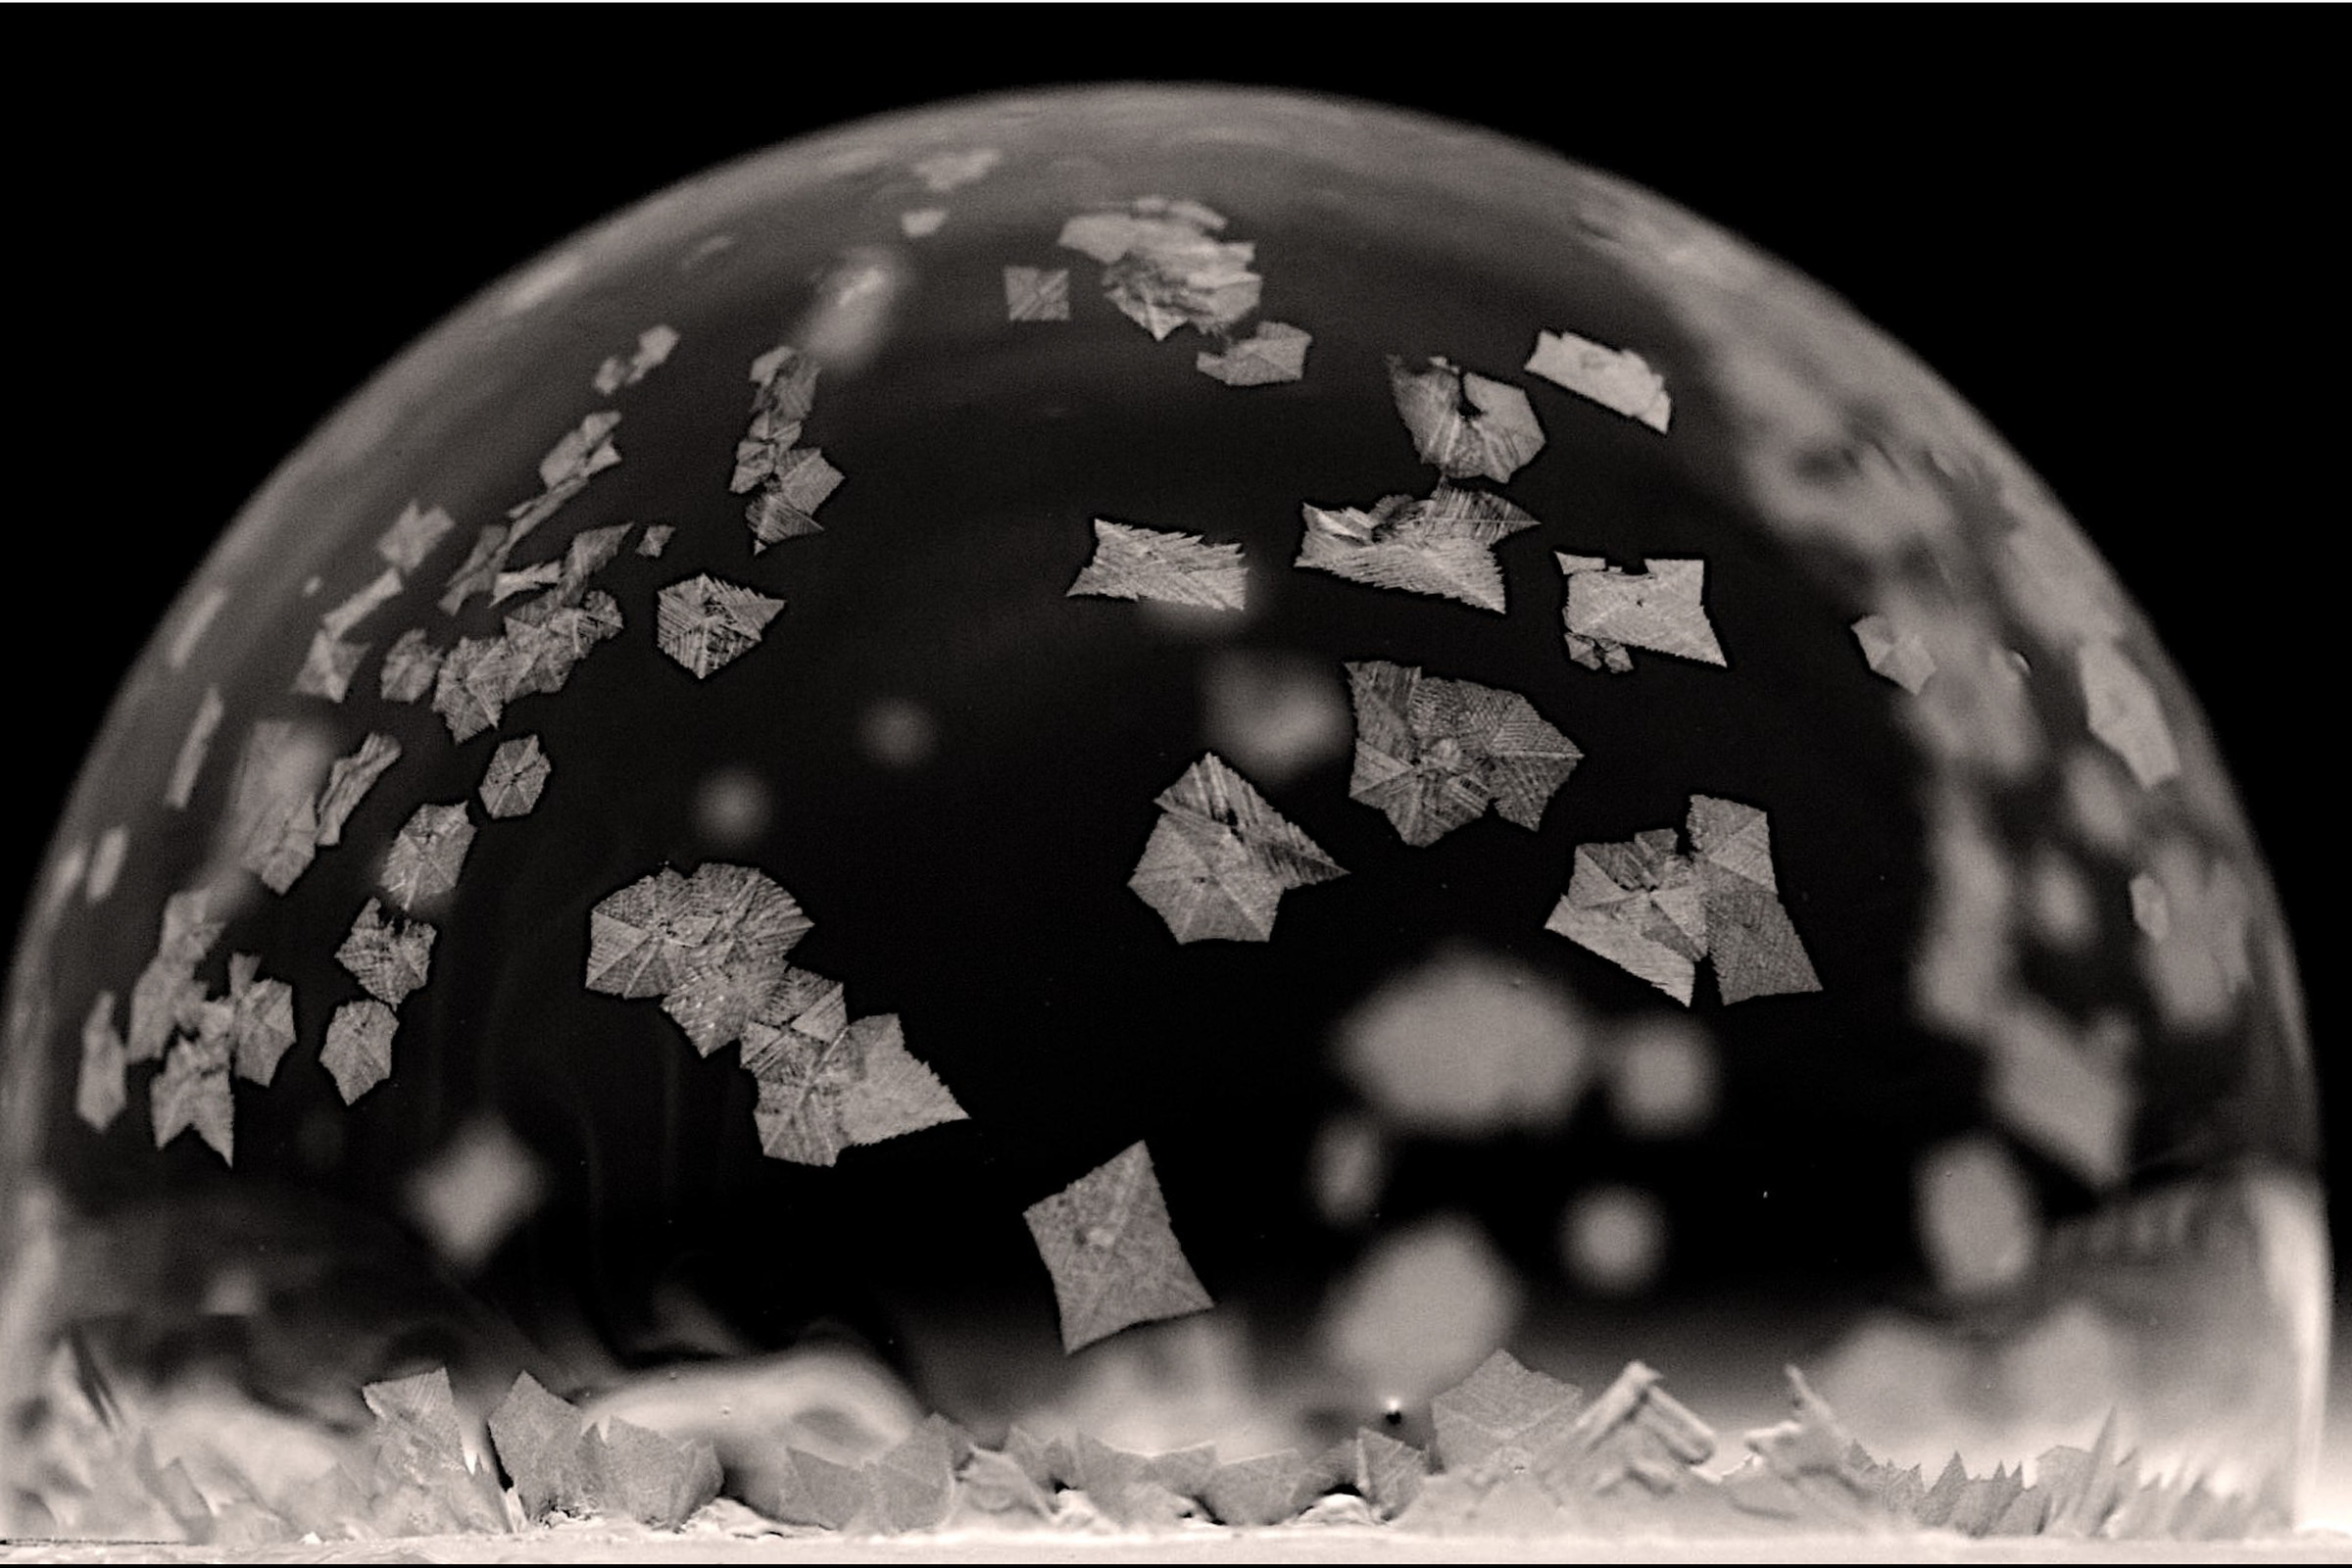 A bubble with ice crystals on the surface.